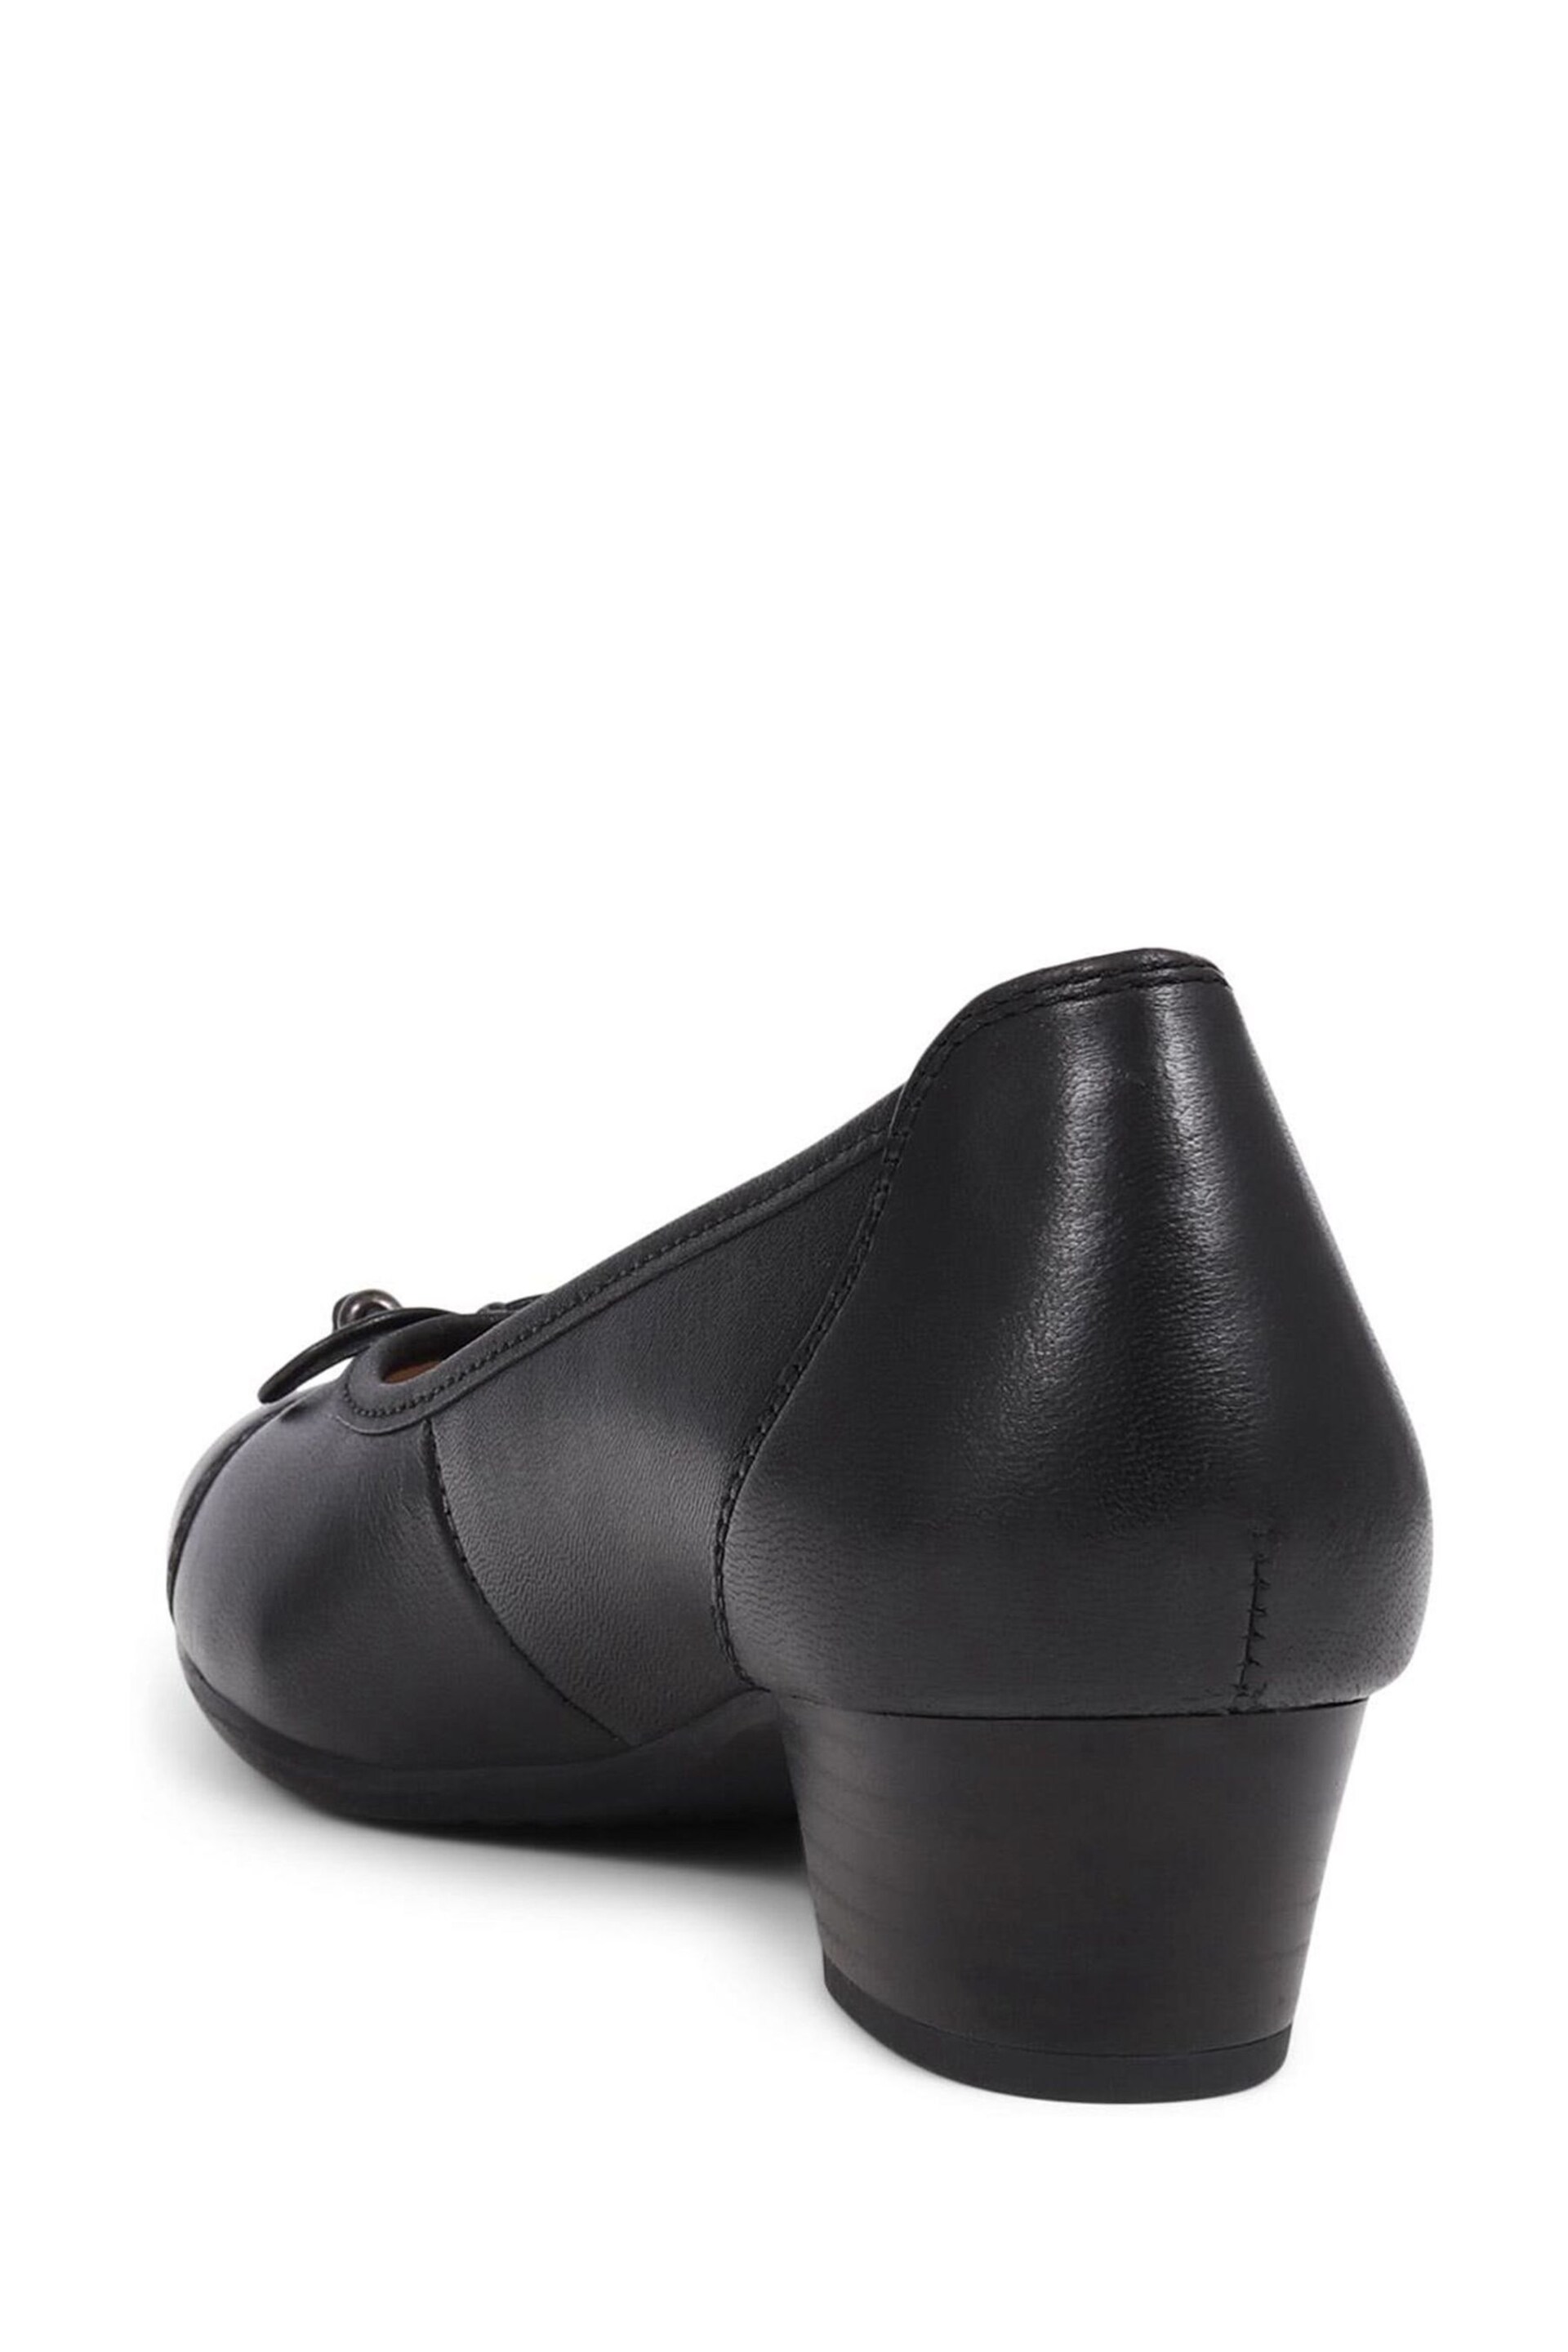 Pavers Leather Block Heel Court Black Shoes - Image 2 of 5